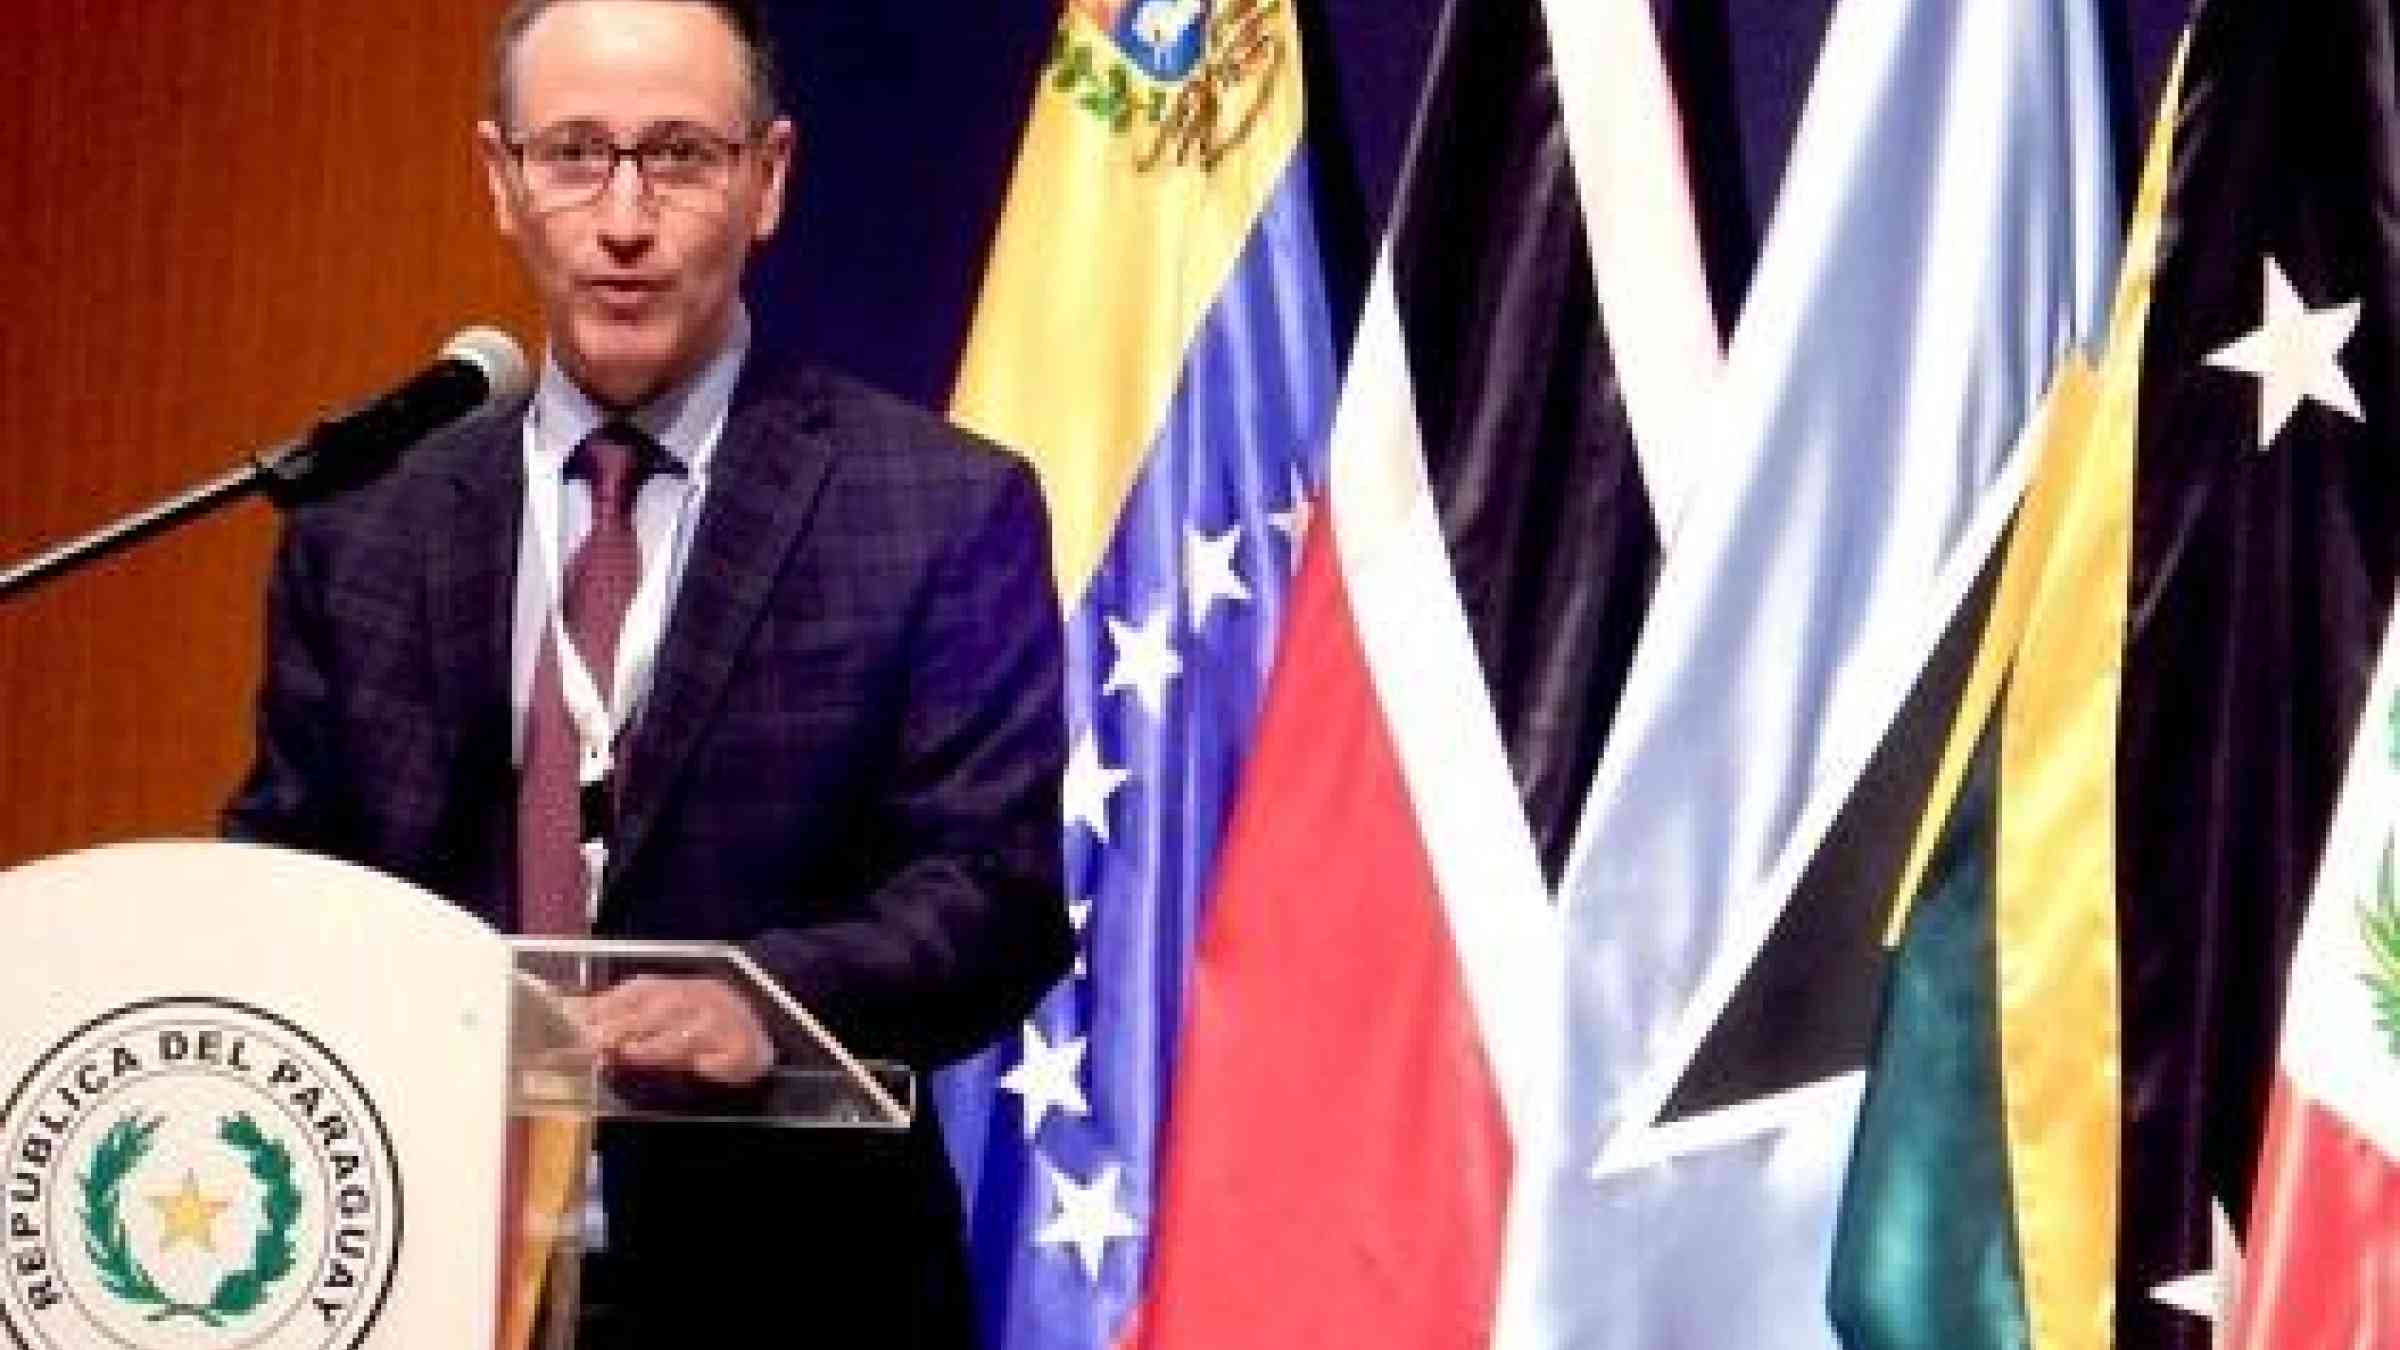 Mr. Robert Glasser, Special Representative of the UN Secretary-General for Disaster Risk Reduction, addresses the Paraguay meeting (Photo: UNISDR)